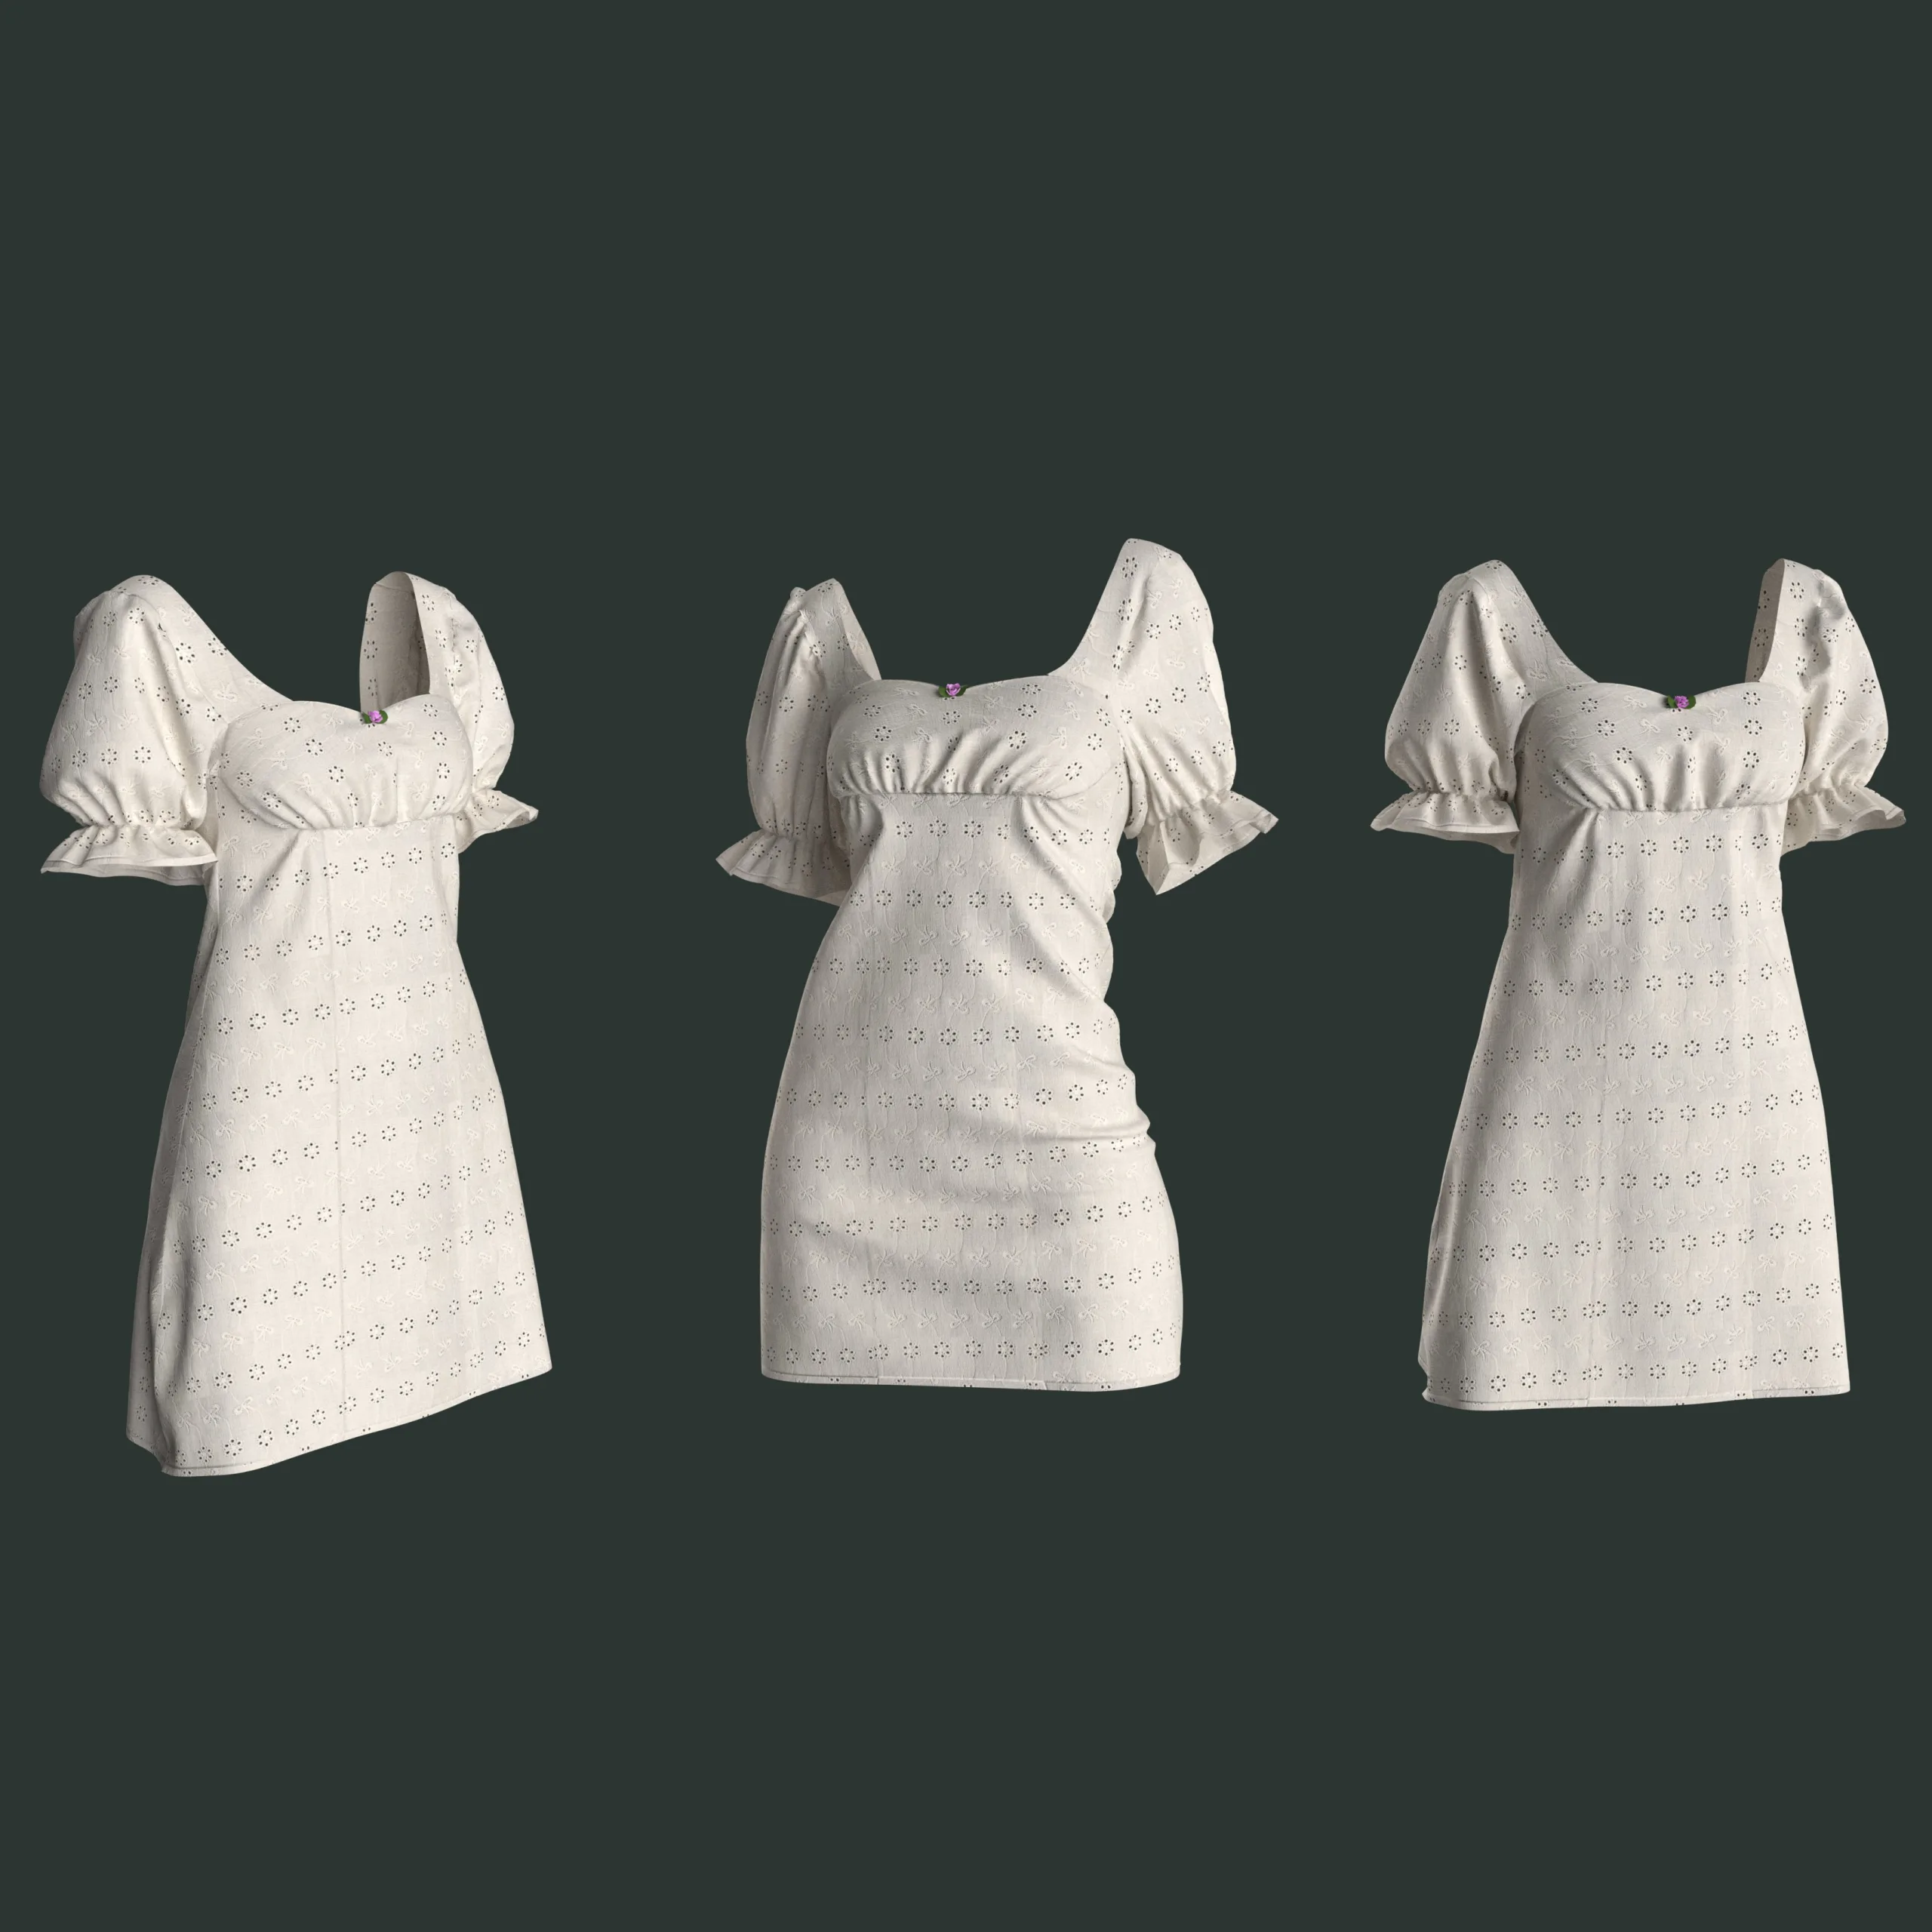 3 Dress made in Marvelous / Clo3D